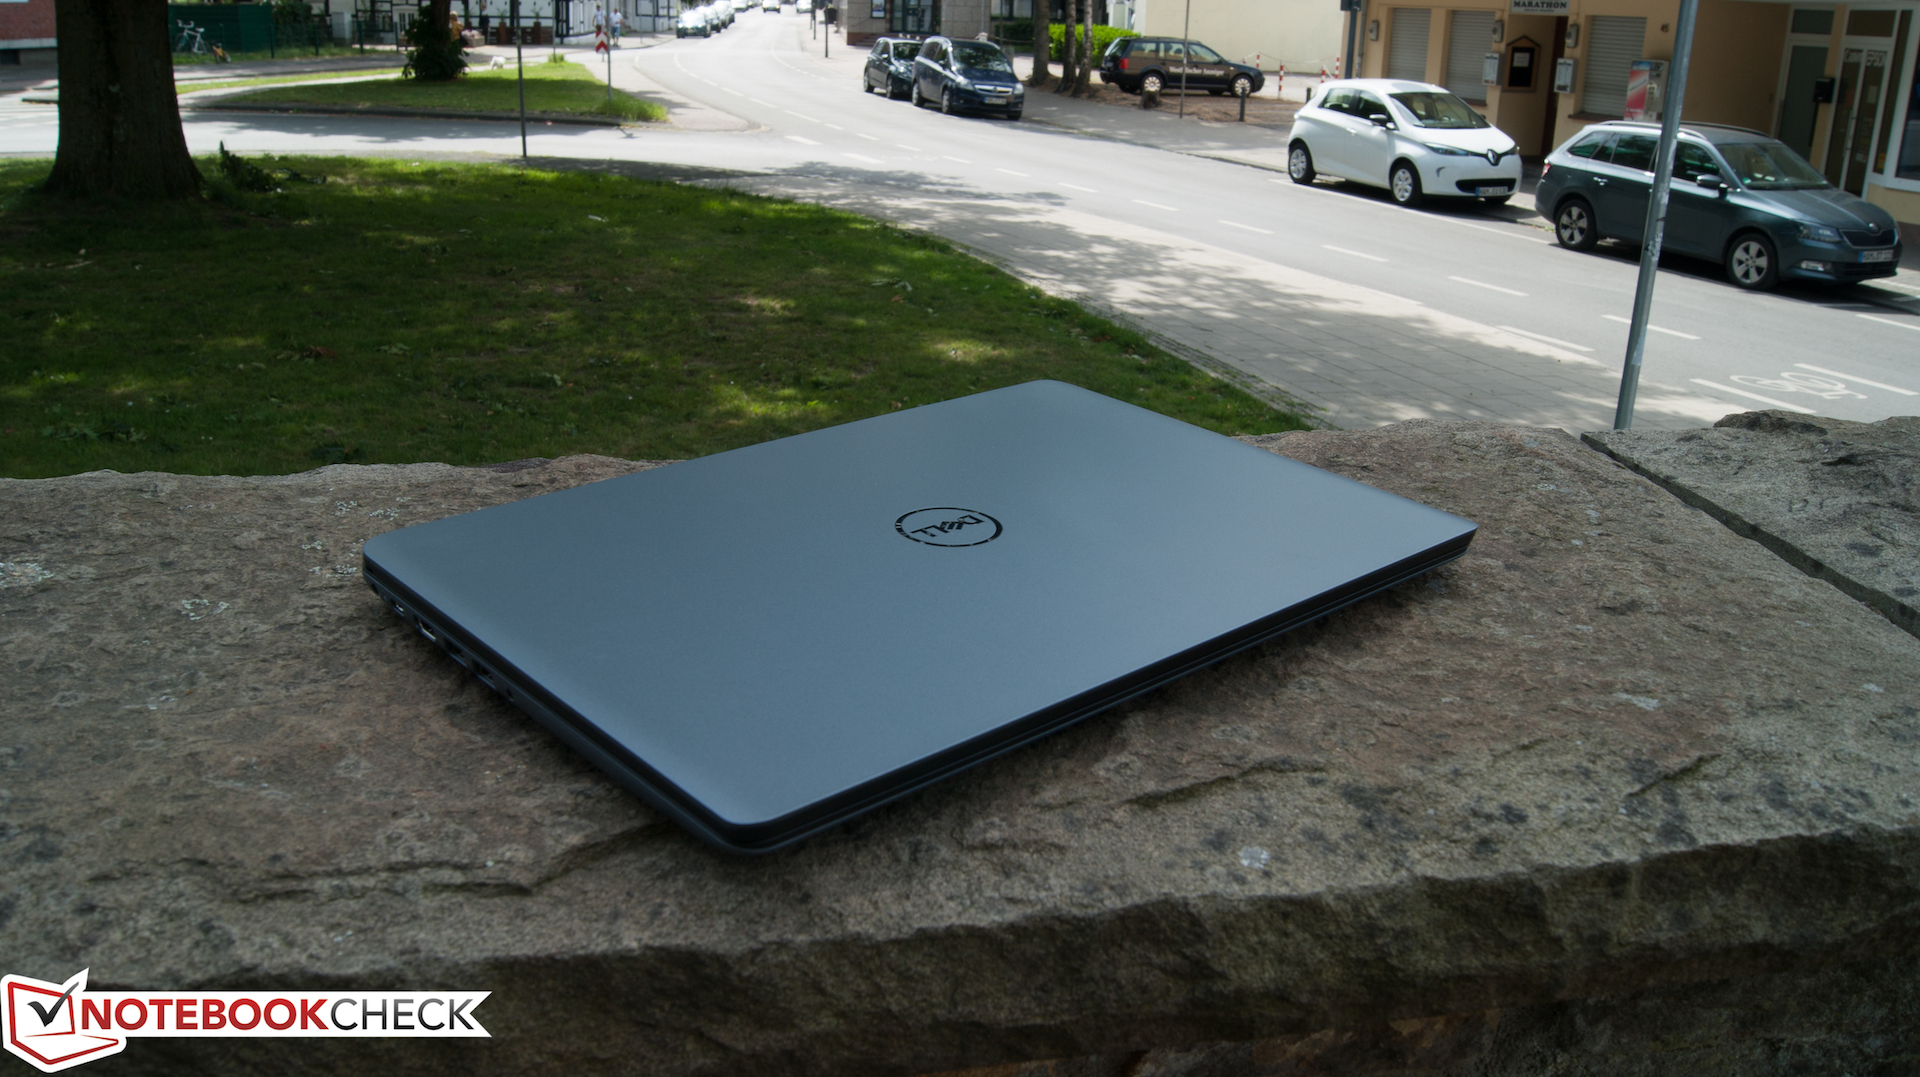 Dell Vostro 15-5581 Laptop Review: An office laptop with an MX130 